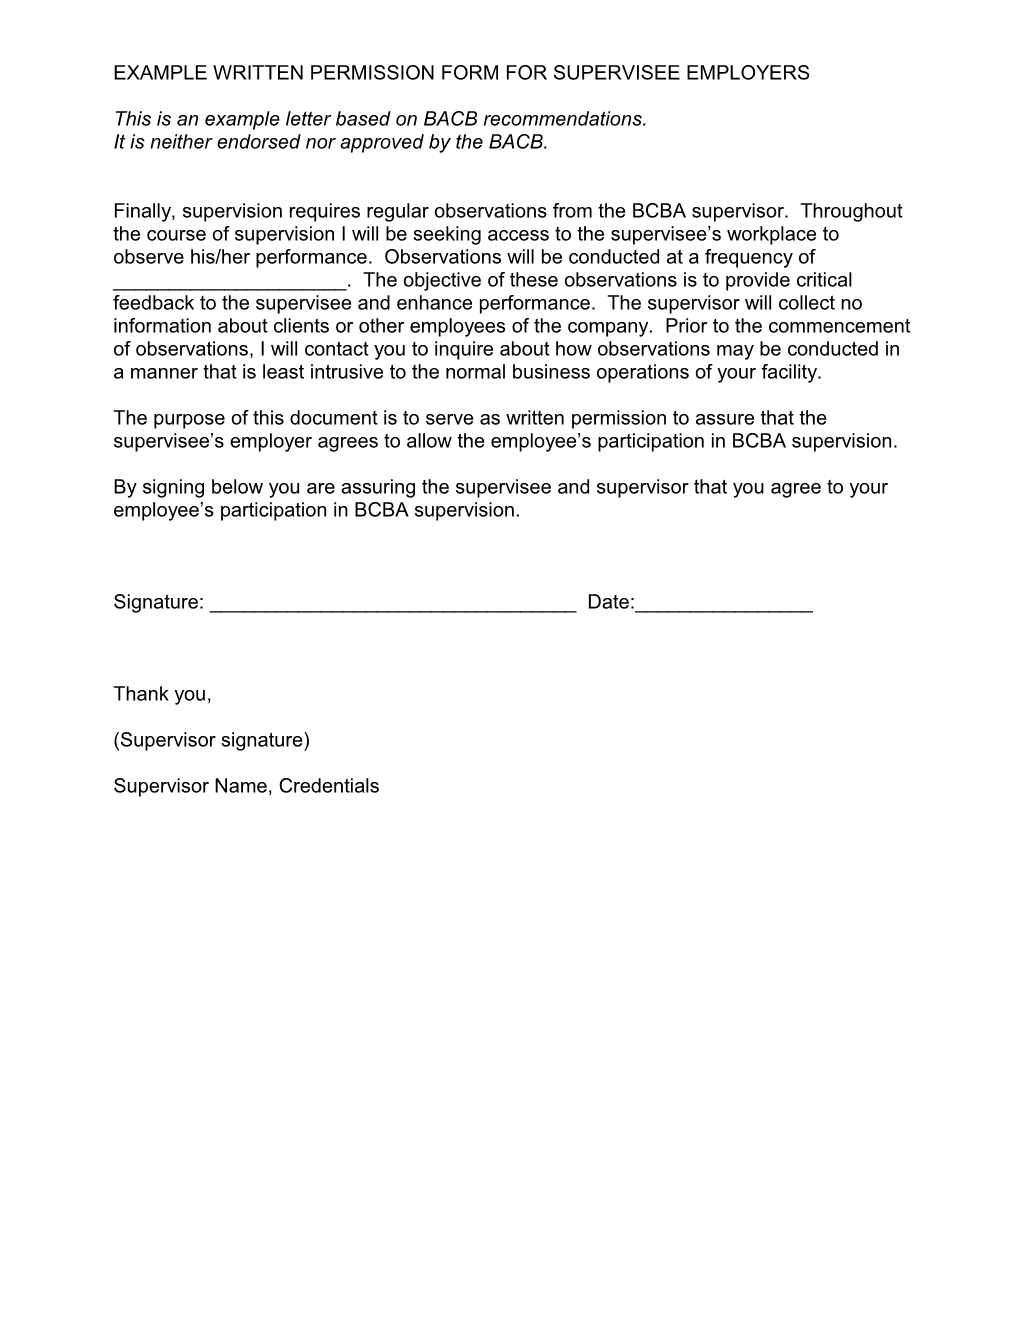 Example Written Permission Form for Supervisee Employers